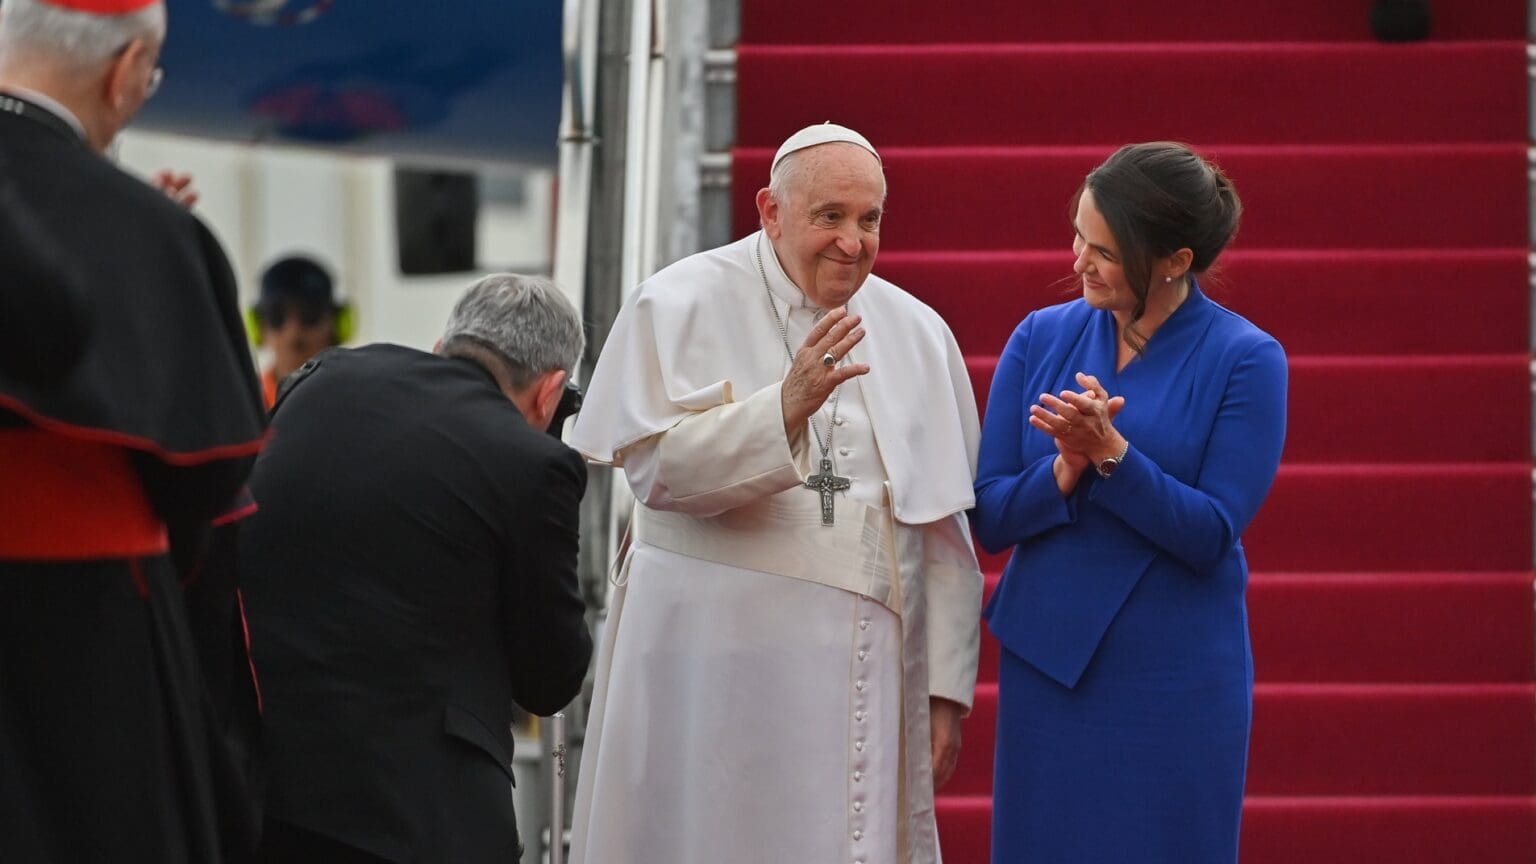 Pope Francis’ ‘Peace Mission’ Sparks International Reactions